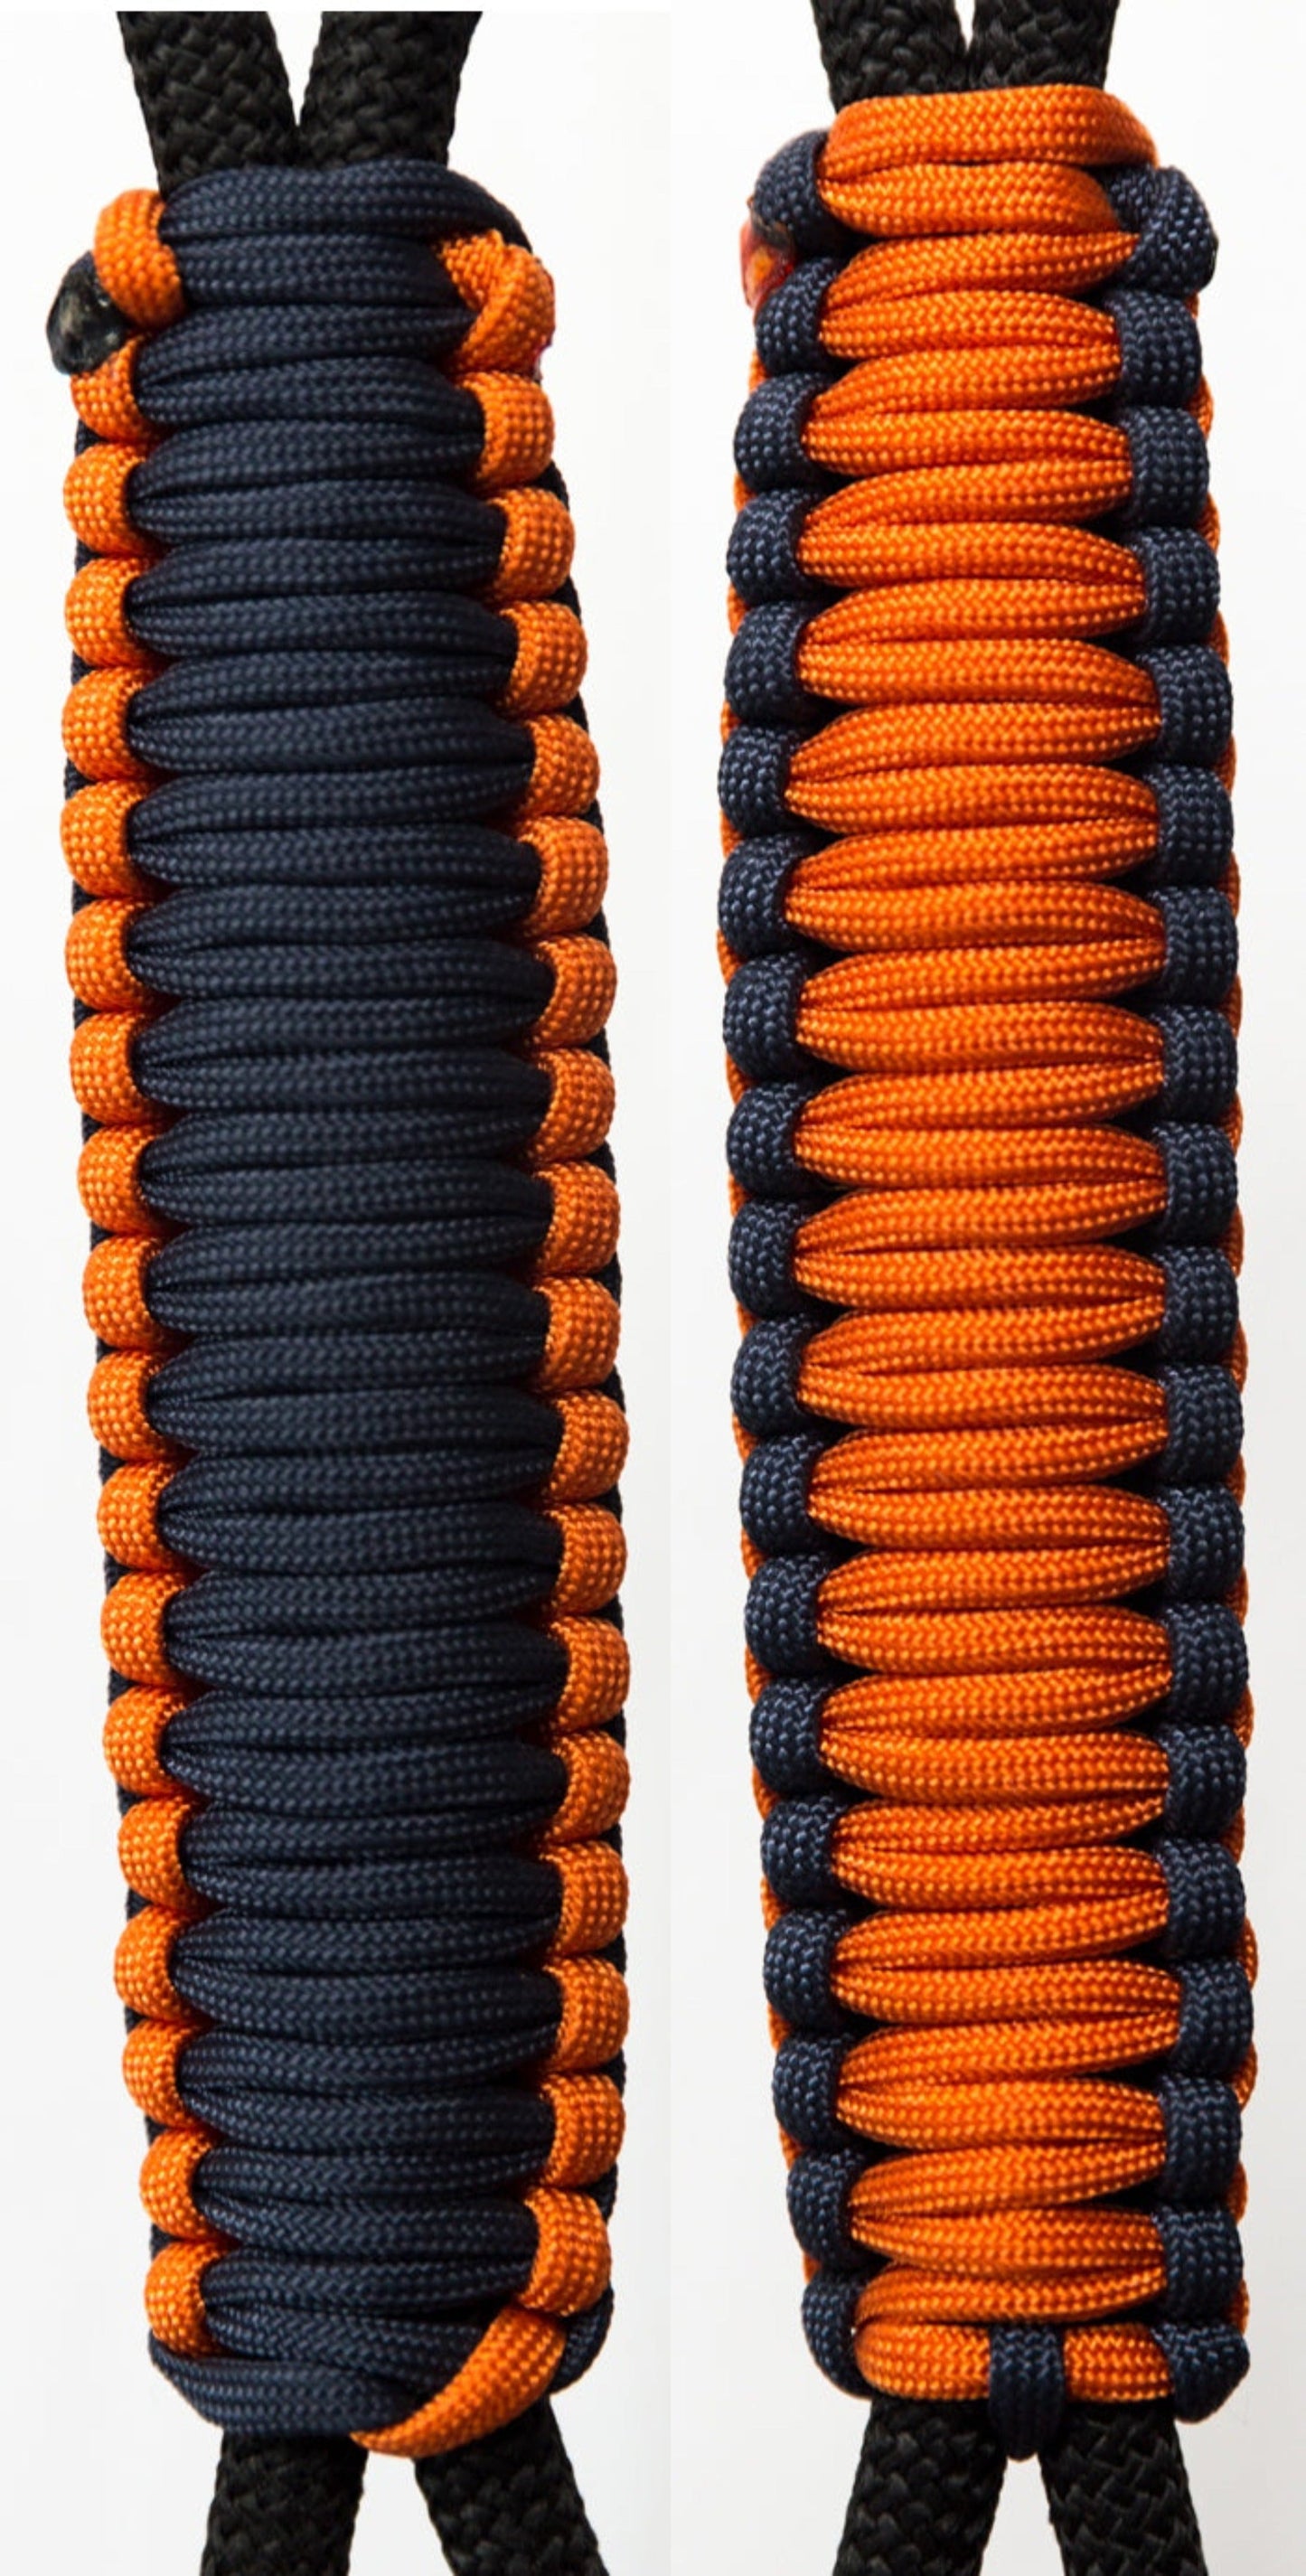 Navy & Burnt Orange C013C003 -Paracord Handmade Handles for Stainless Steel Tumblers - Made in USA!